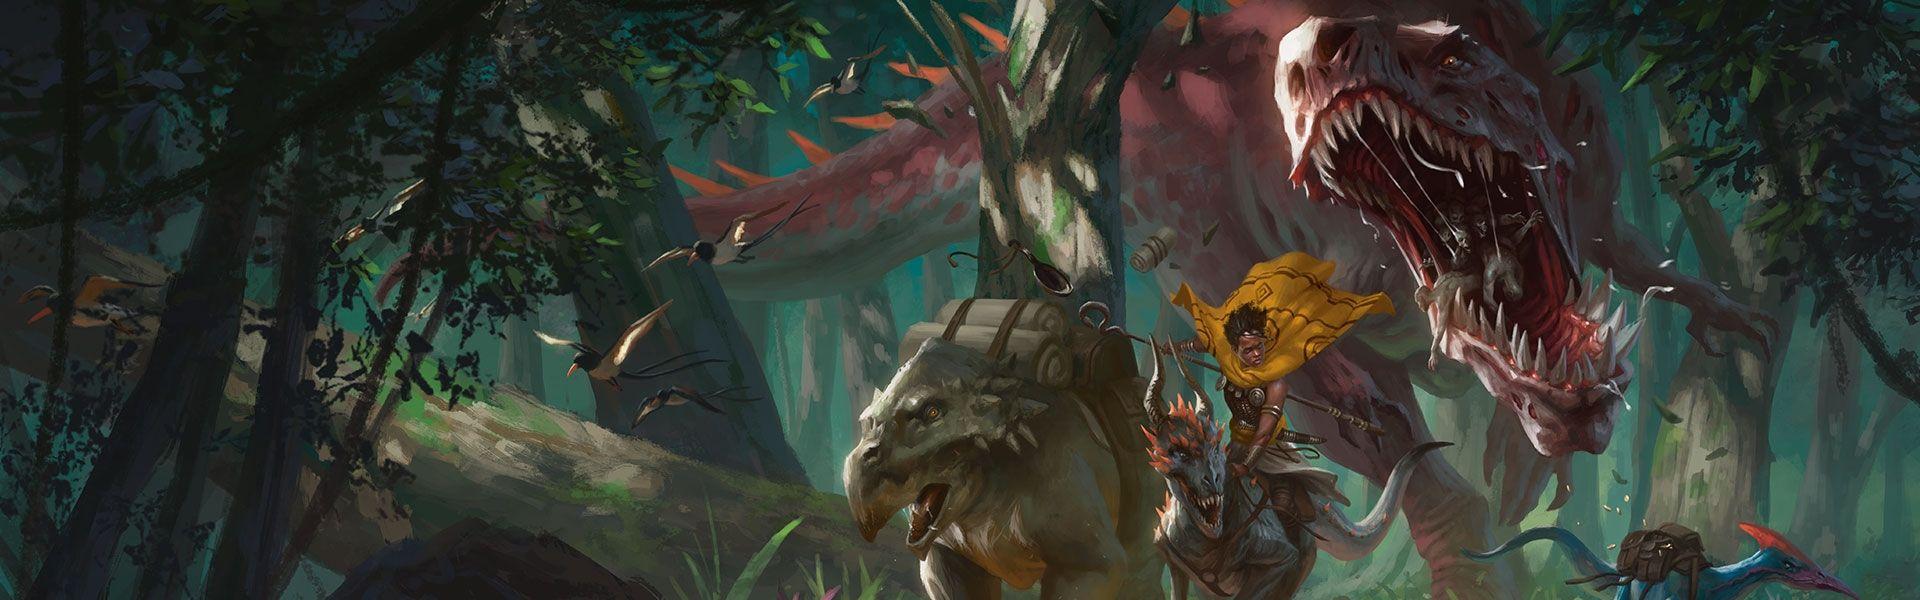 Icon of the Realms: Tomb of Annihilation. Dungeons & Dragons